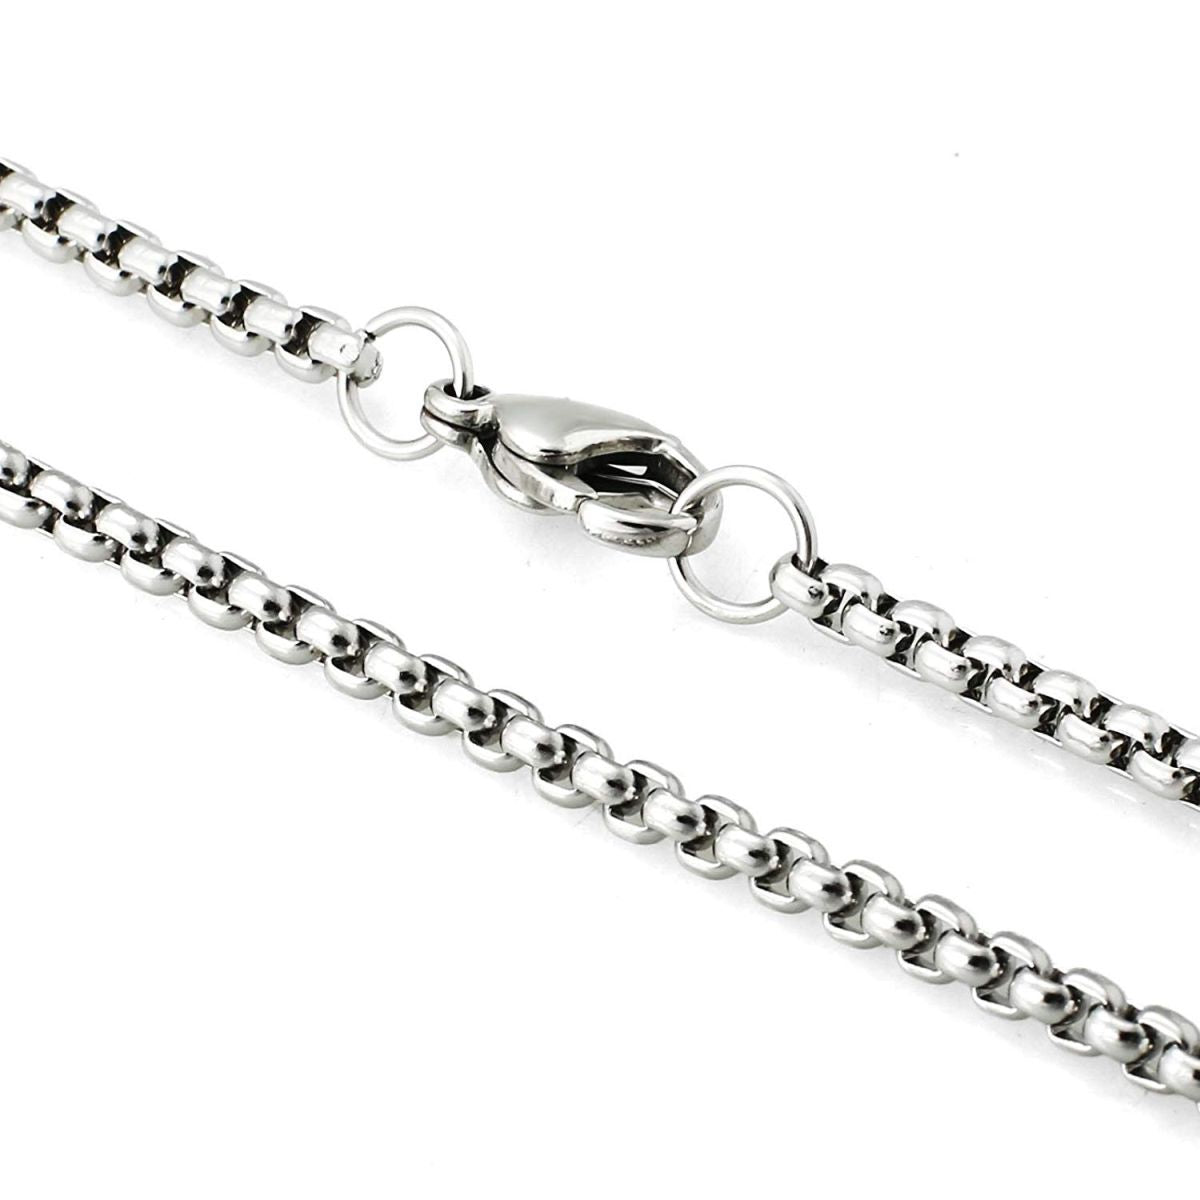 BOSS Chain Necklace Silver | Mainline Menswear United States